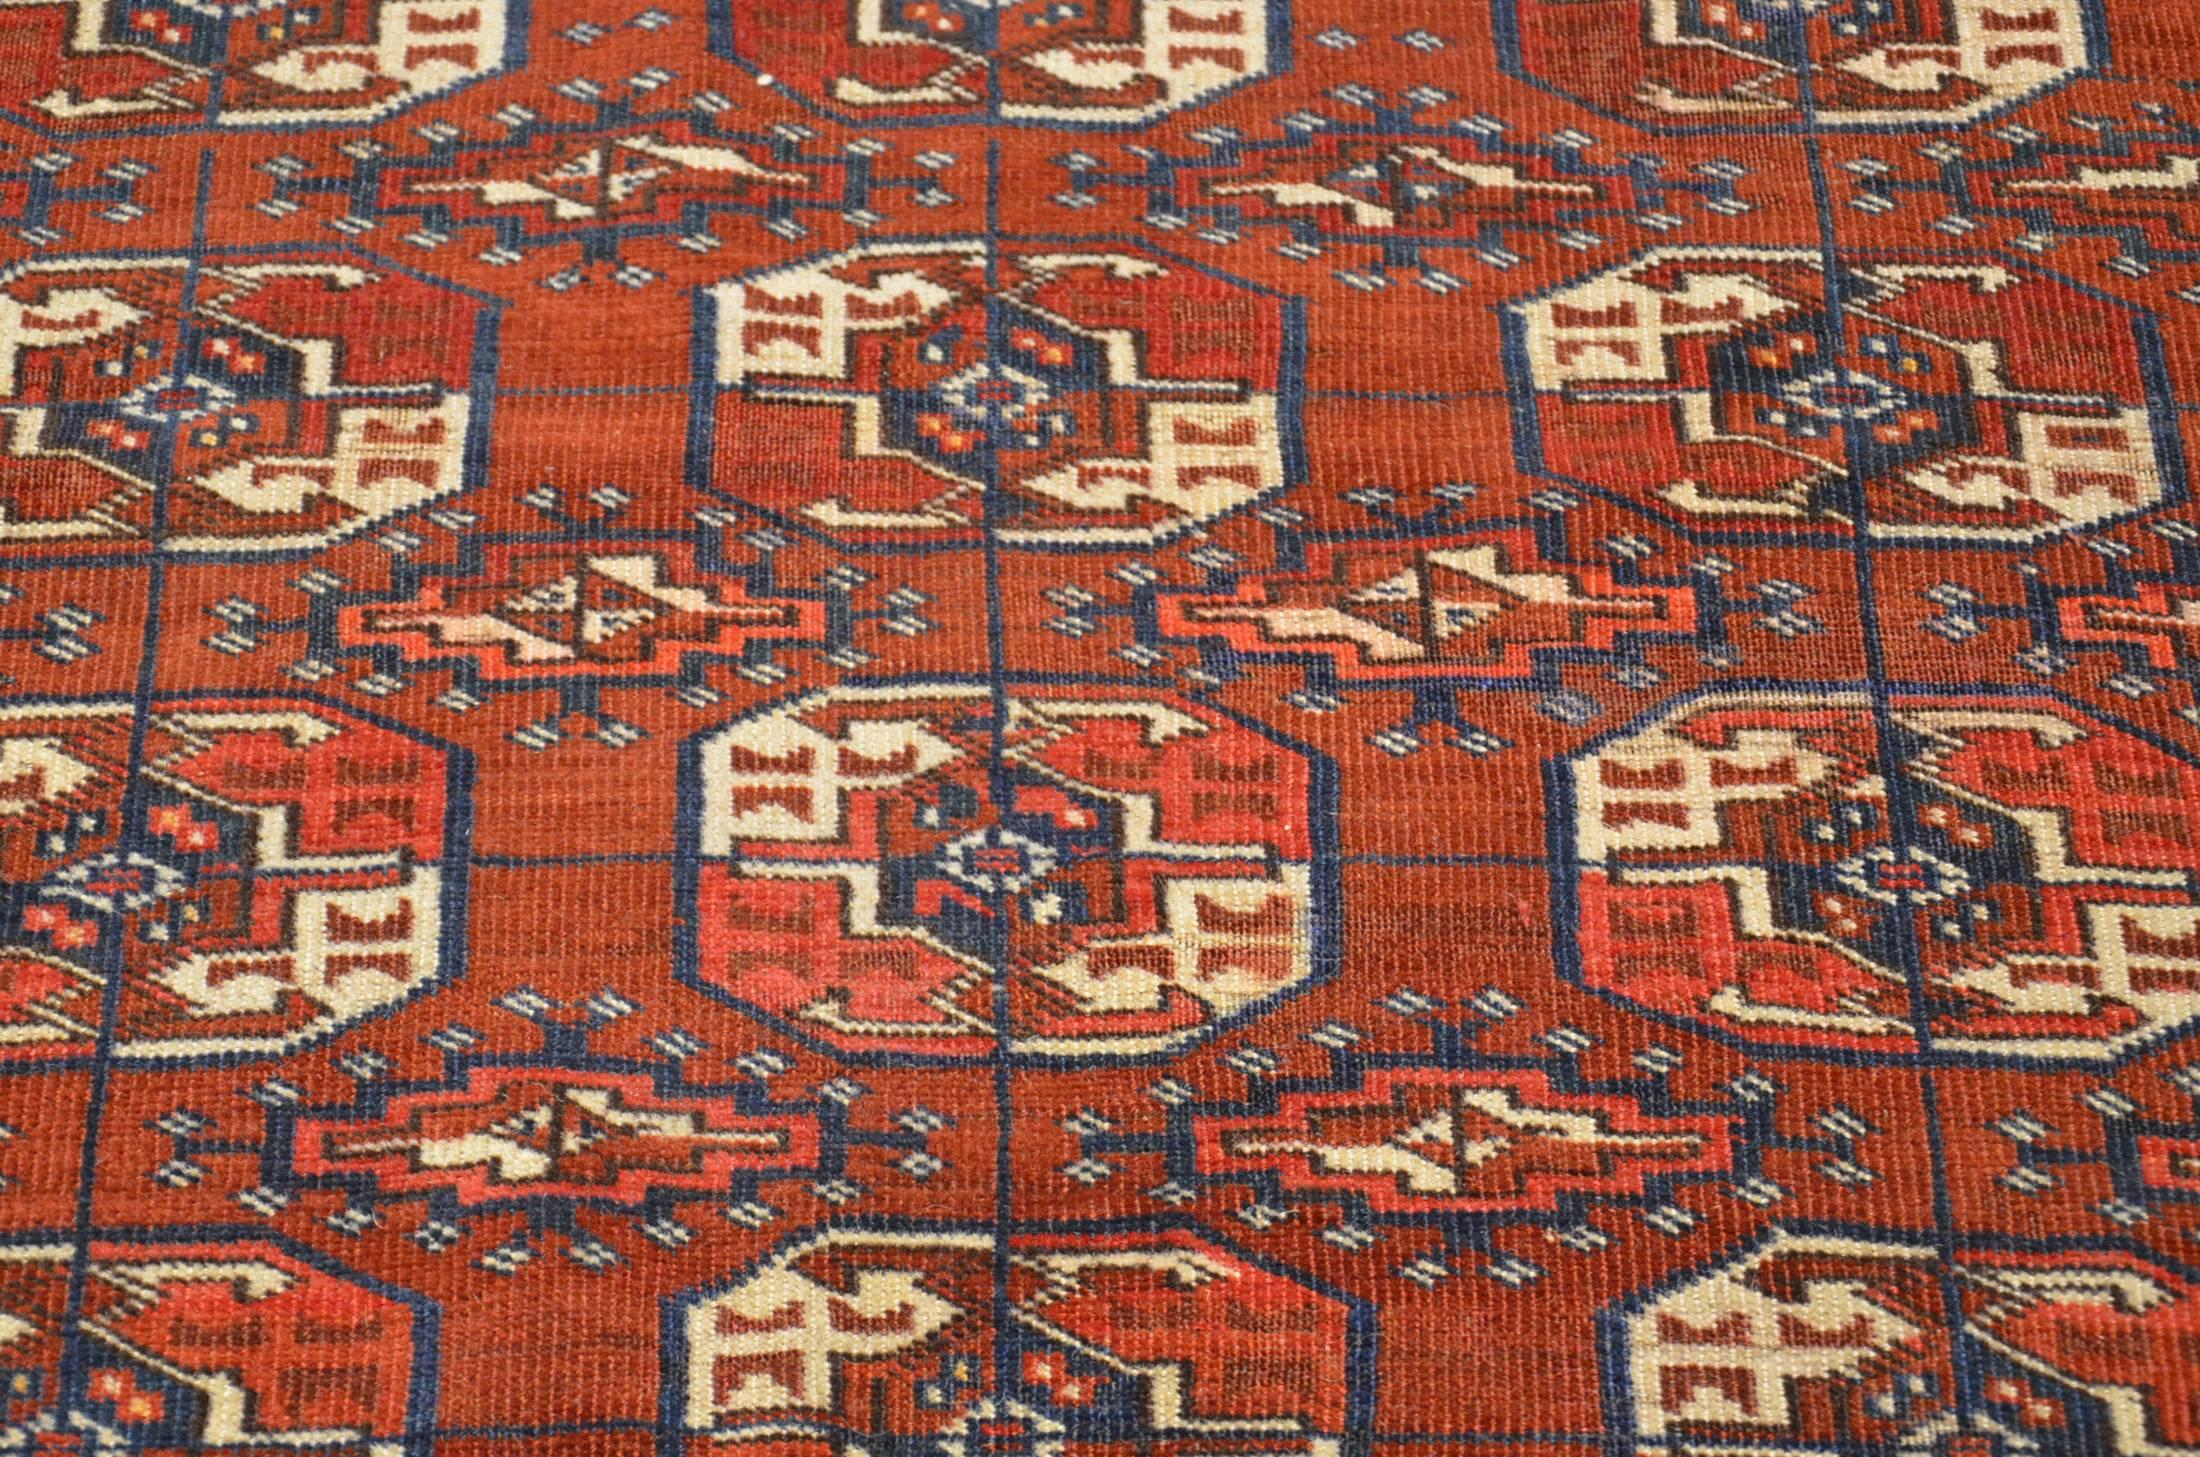 Typical carpet from Western Turkestan design of "Guls" typical of this manufacture and colorful in burgundy wine.